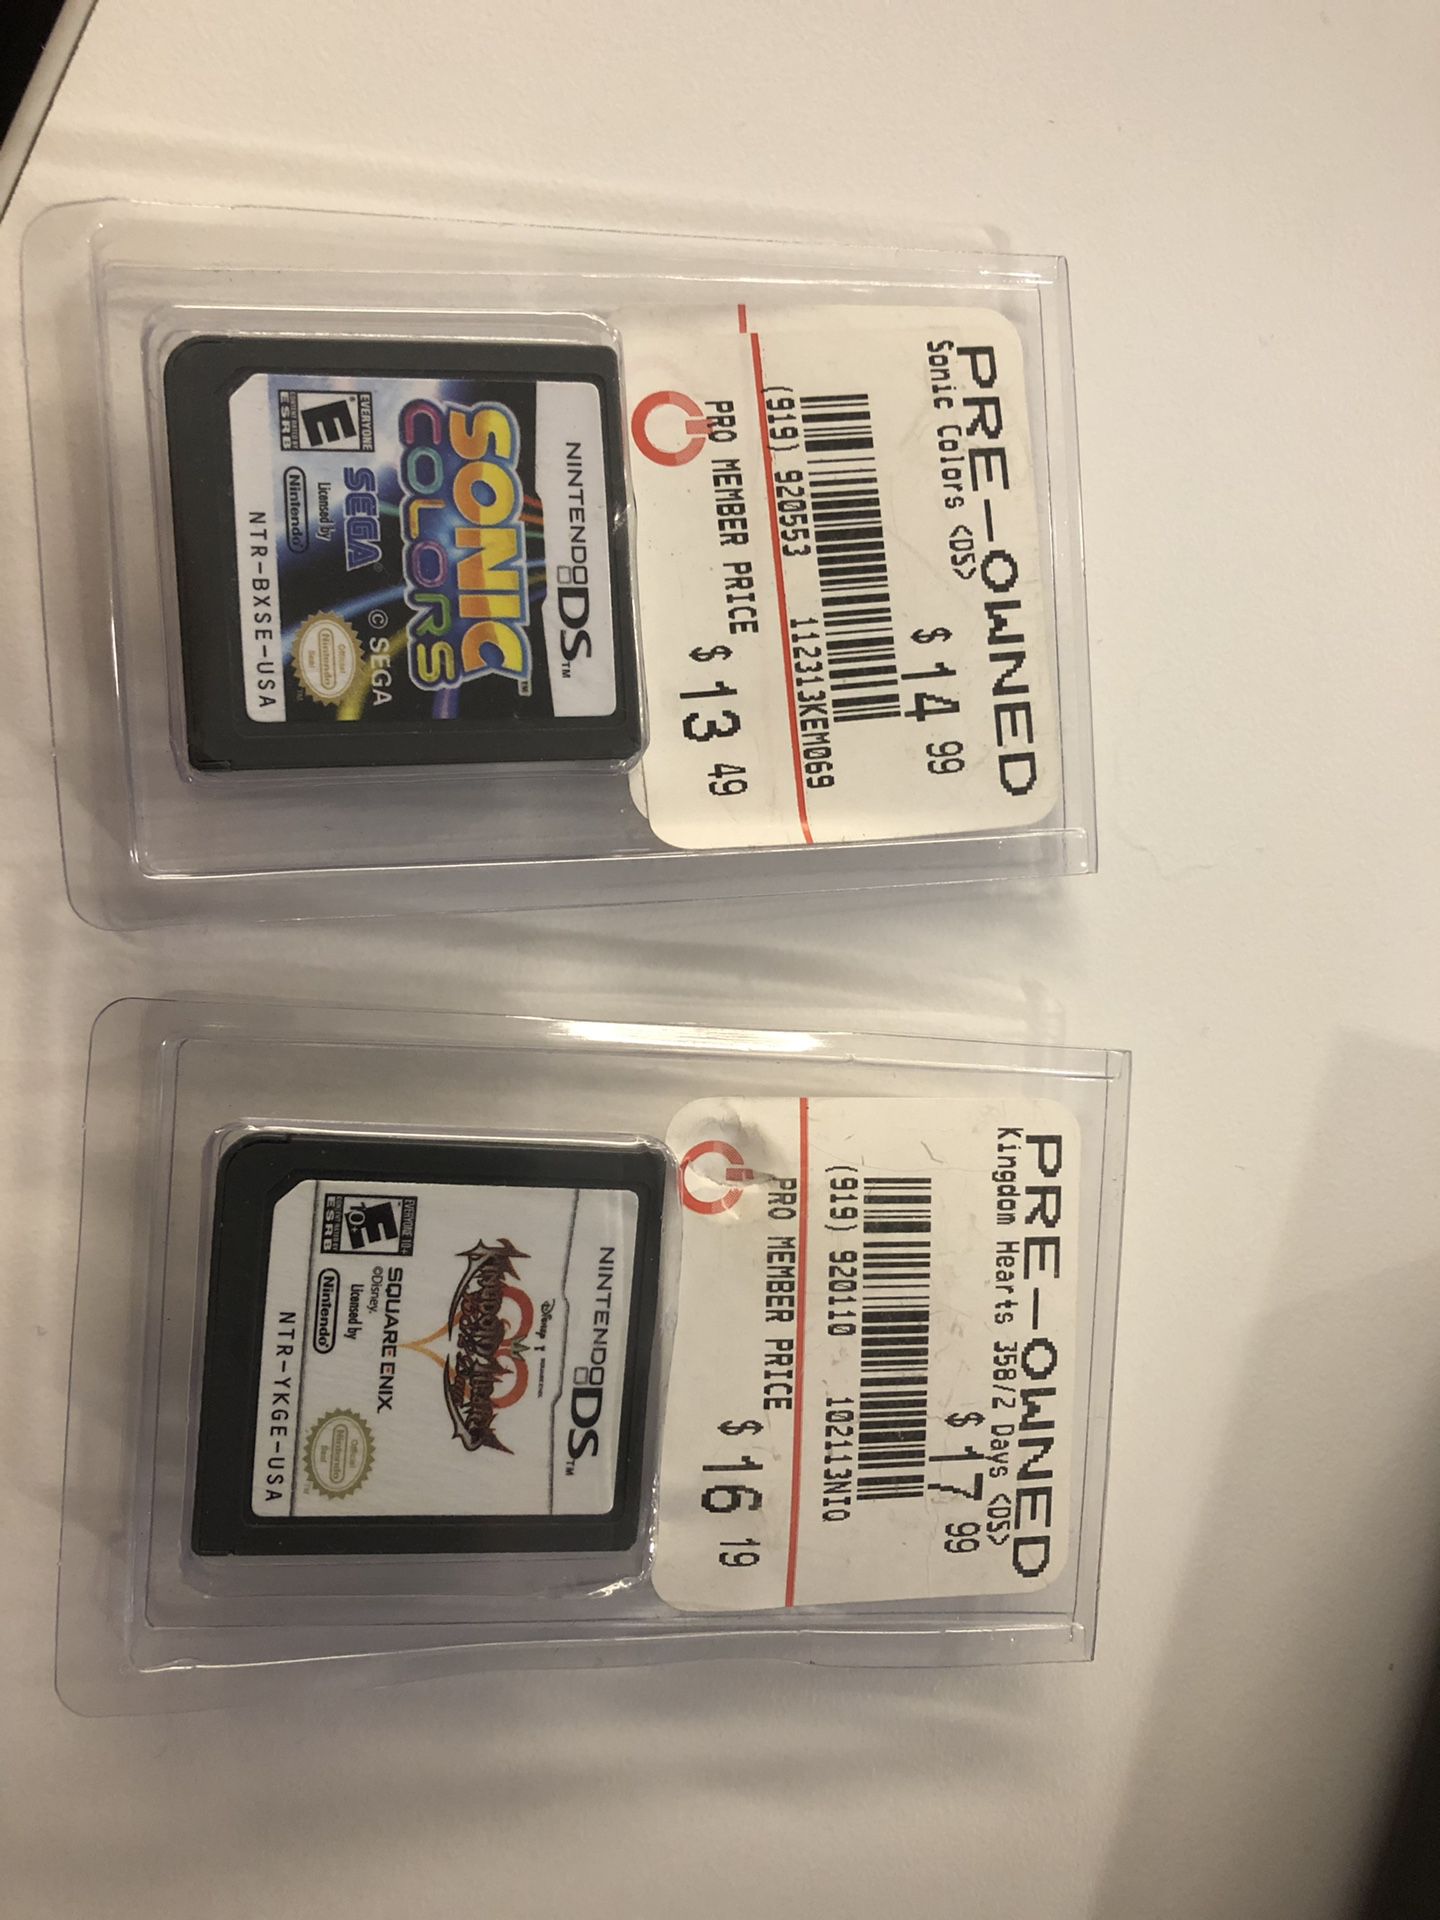 Kingdom Hearts DS and Sonic Colors DS games